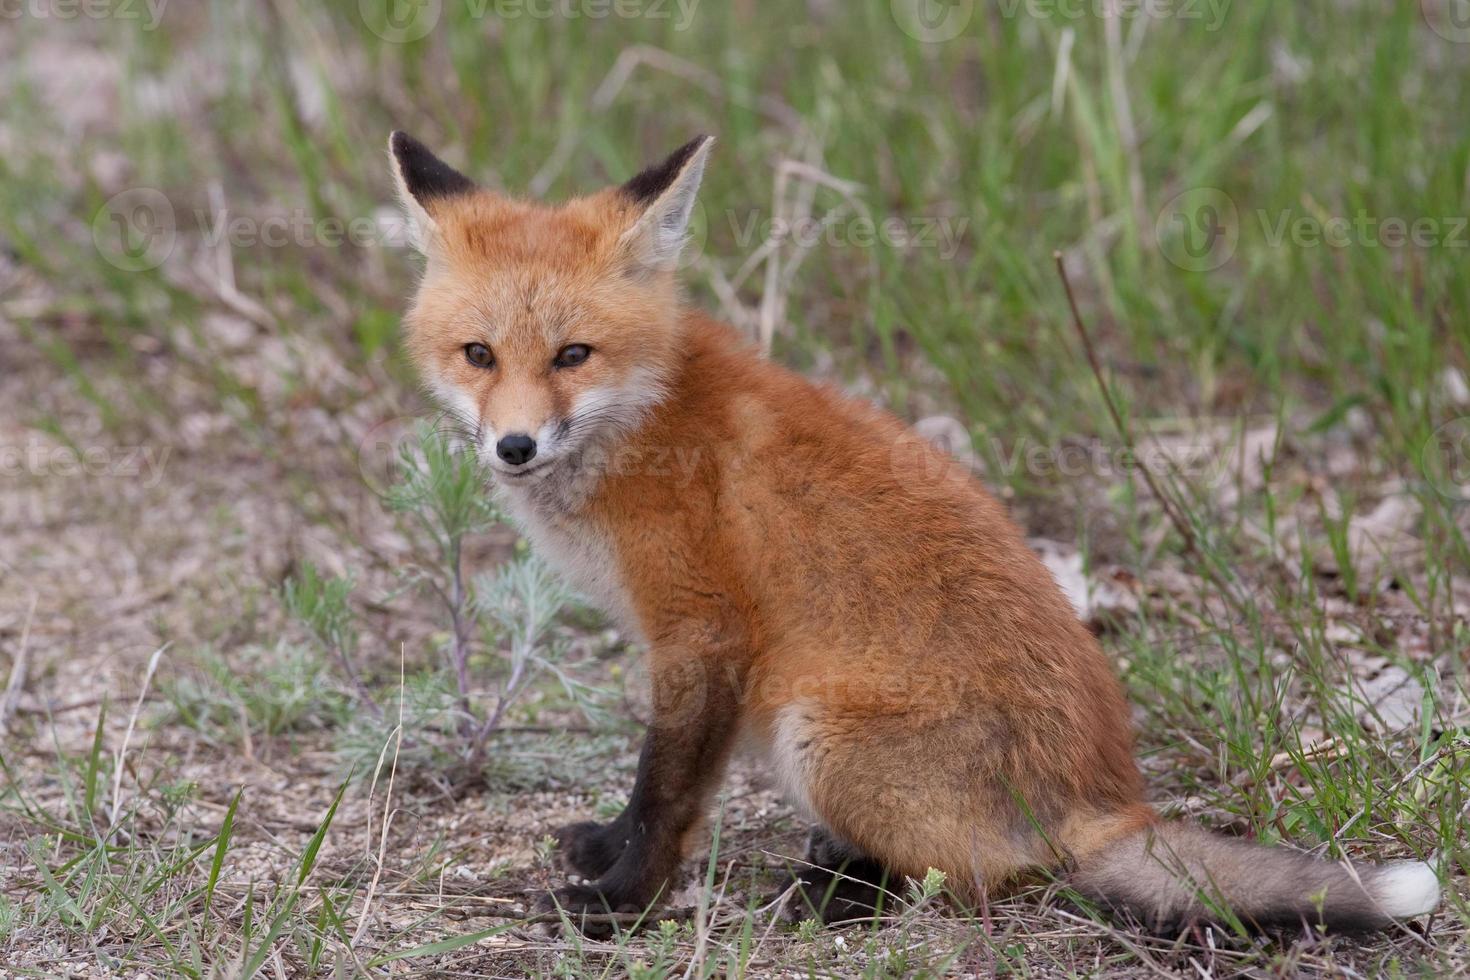 Red fox pup photo